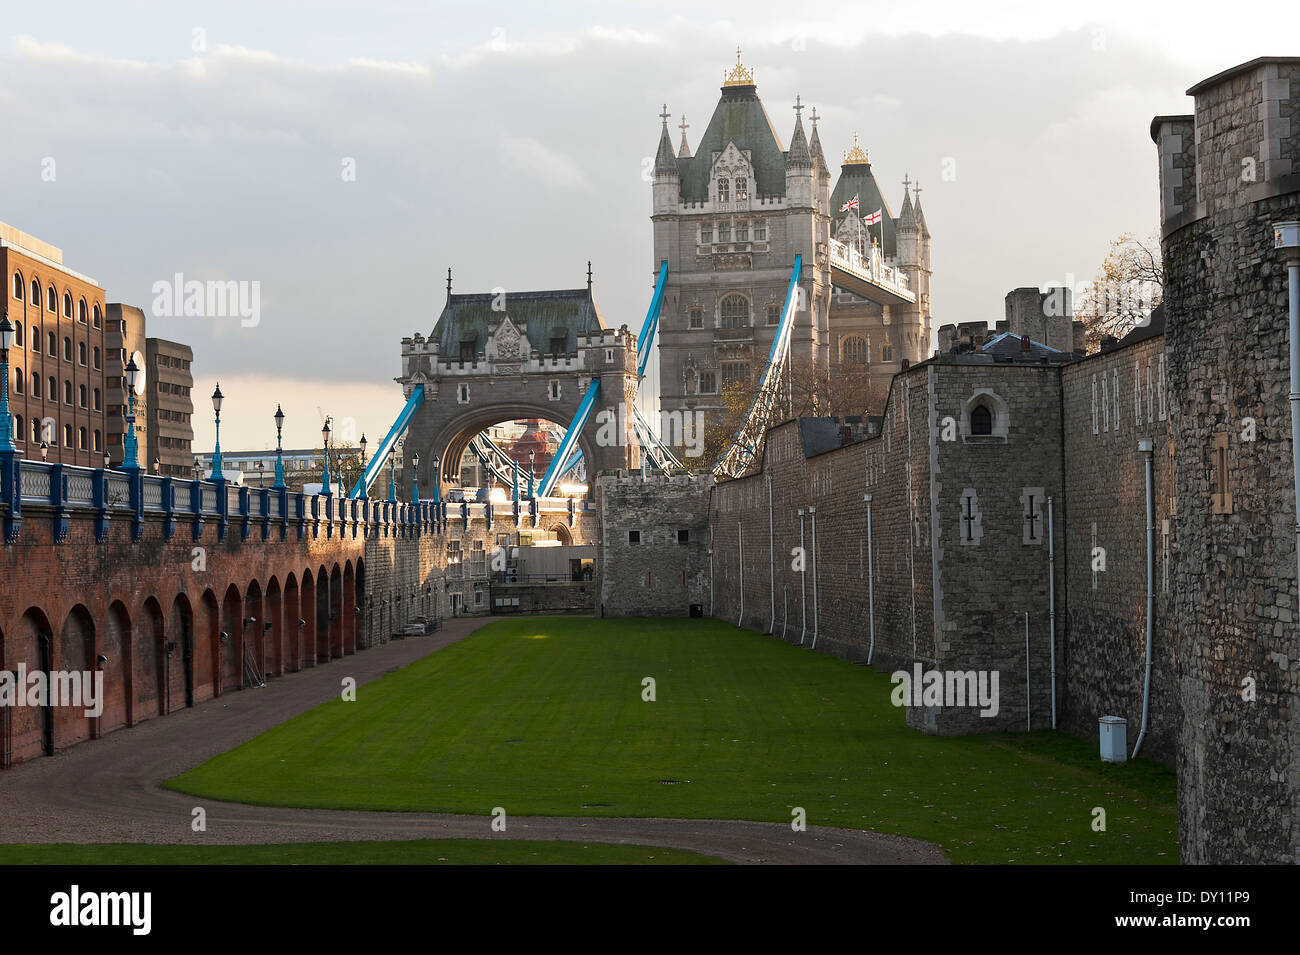 Thick Stone Walls of The Tower of London with Lawned Area and Tower Bridge in City of Westminster London England United Kingdom Stock Photo